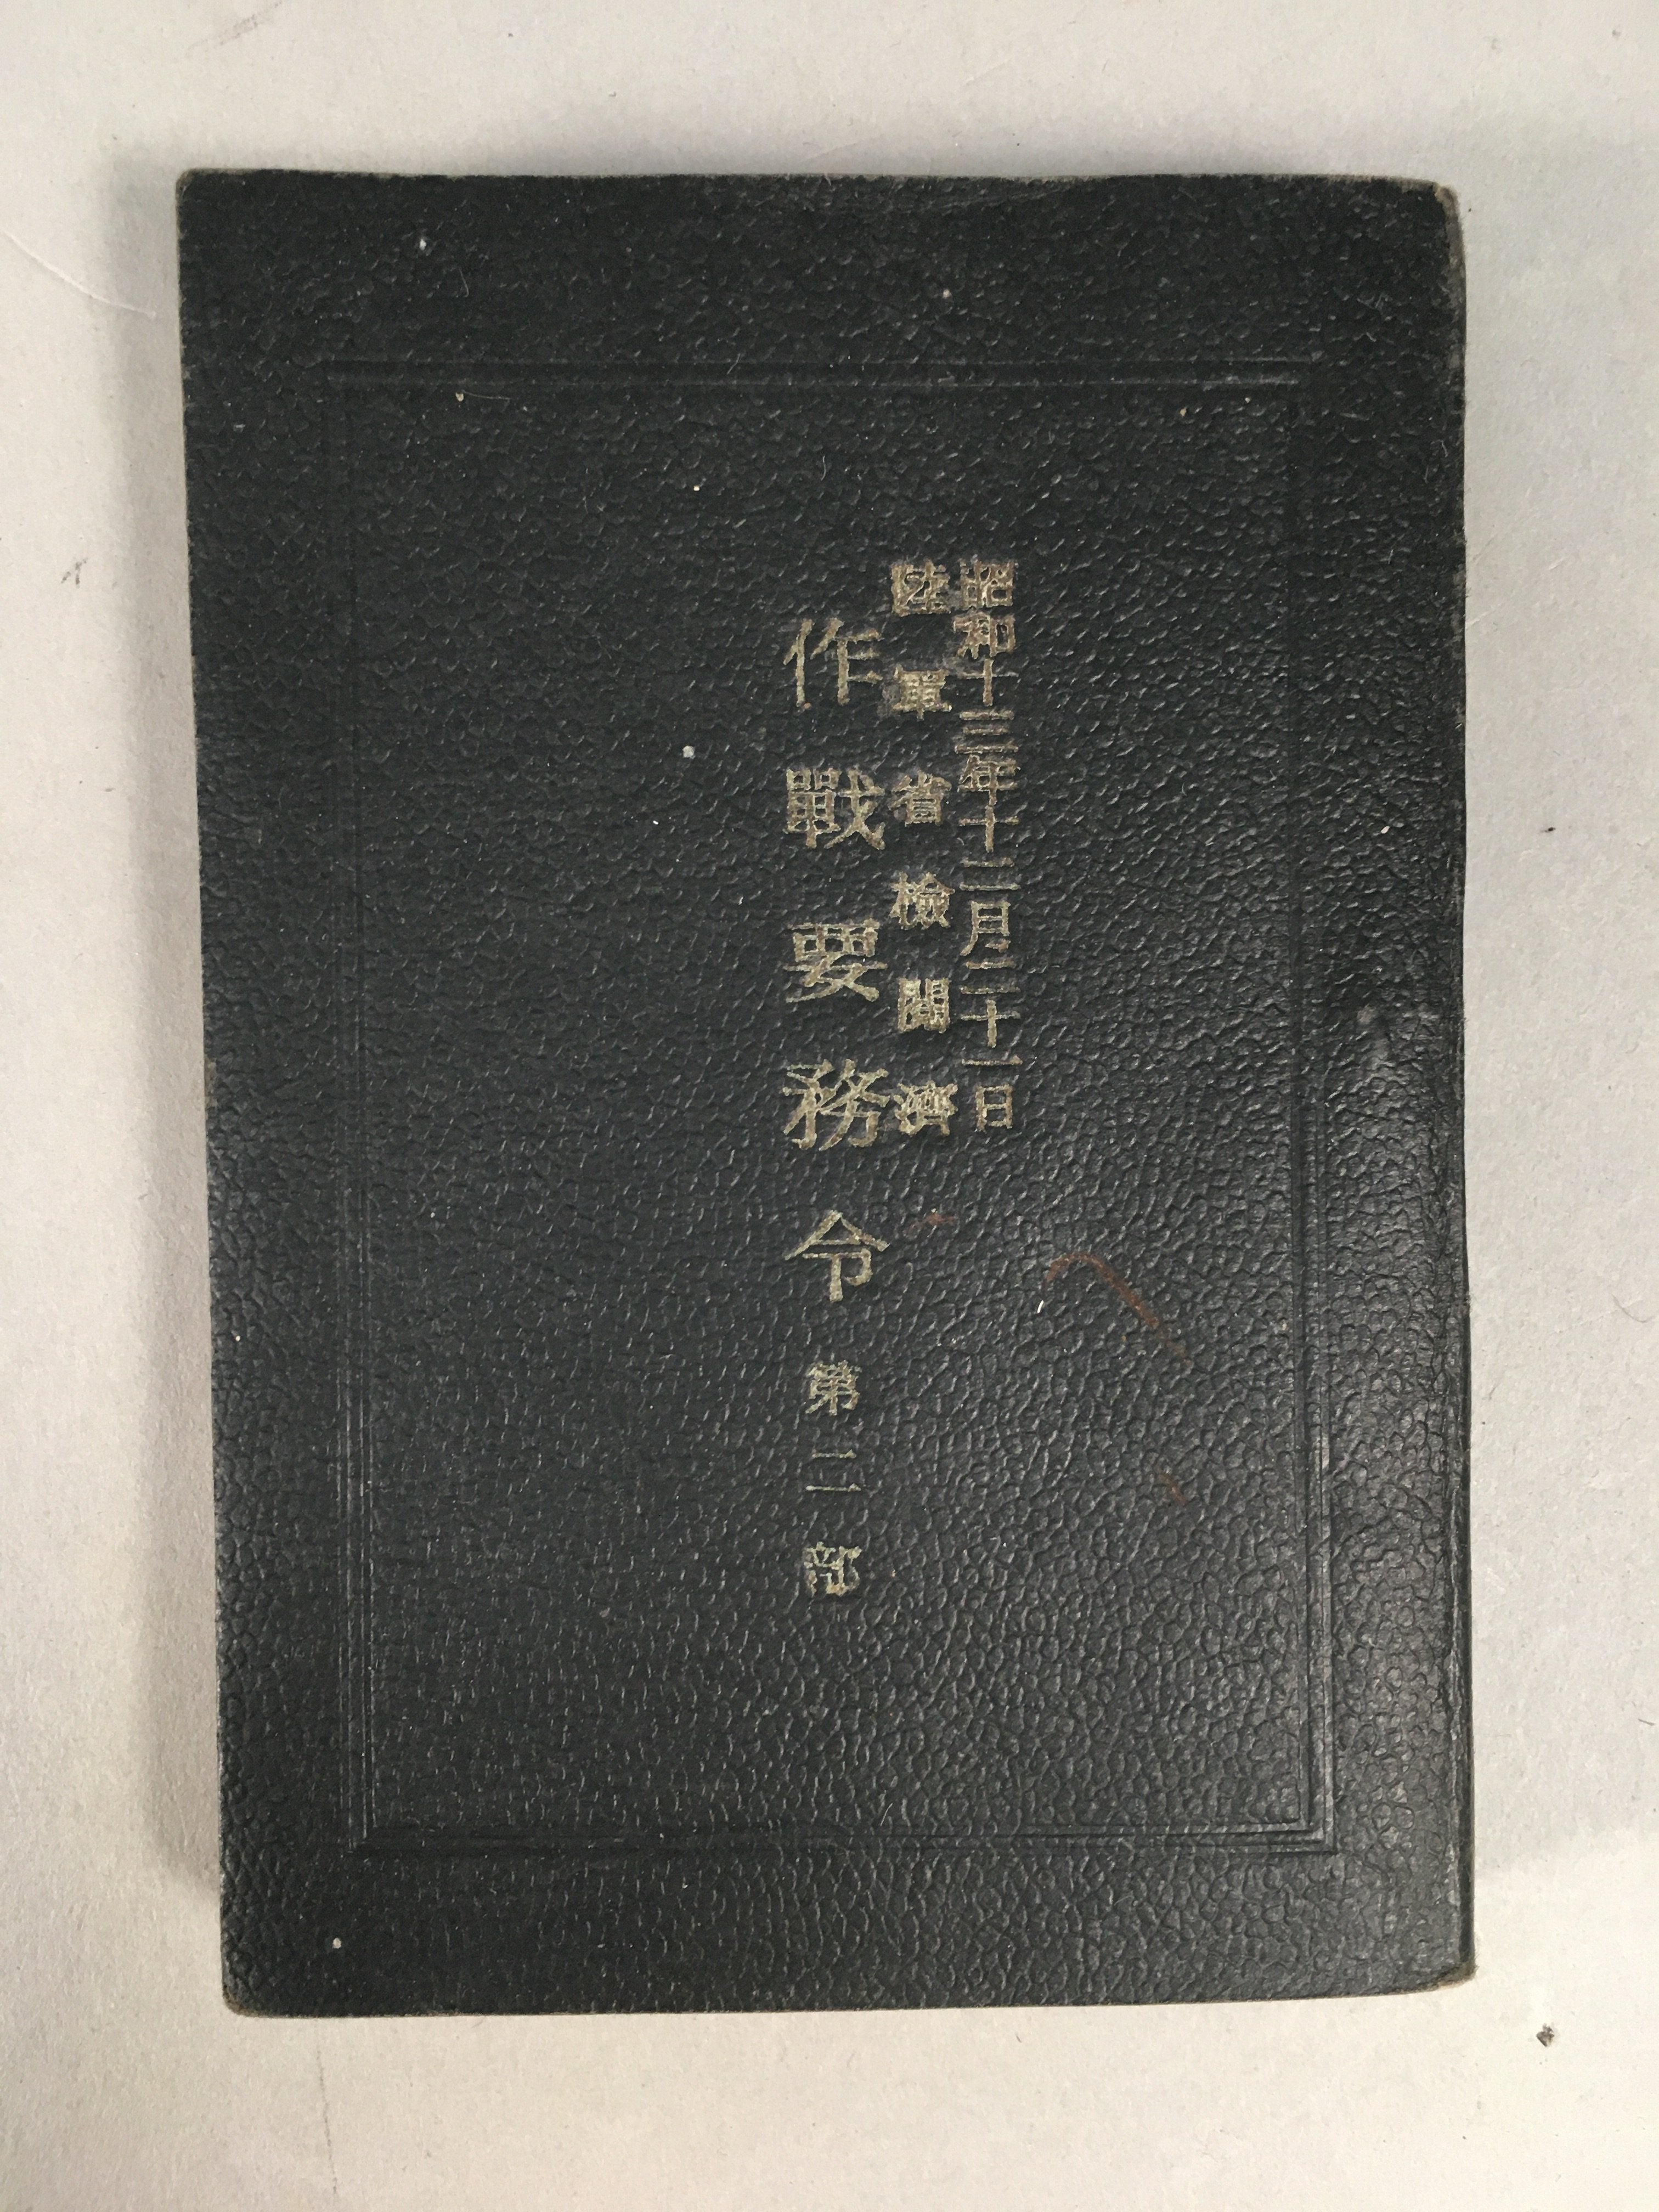 Japanese Military Textbook Vtg 1938 Army Tactic Book JK148